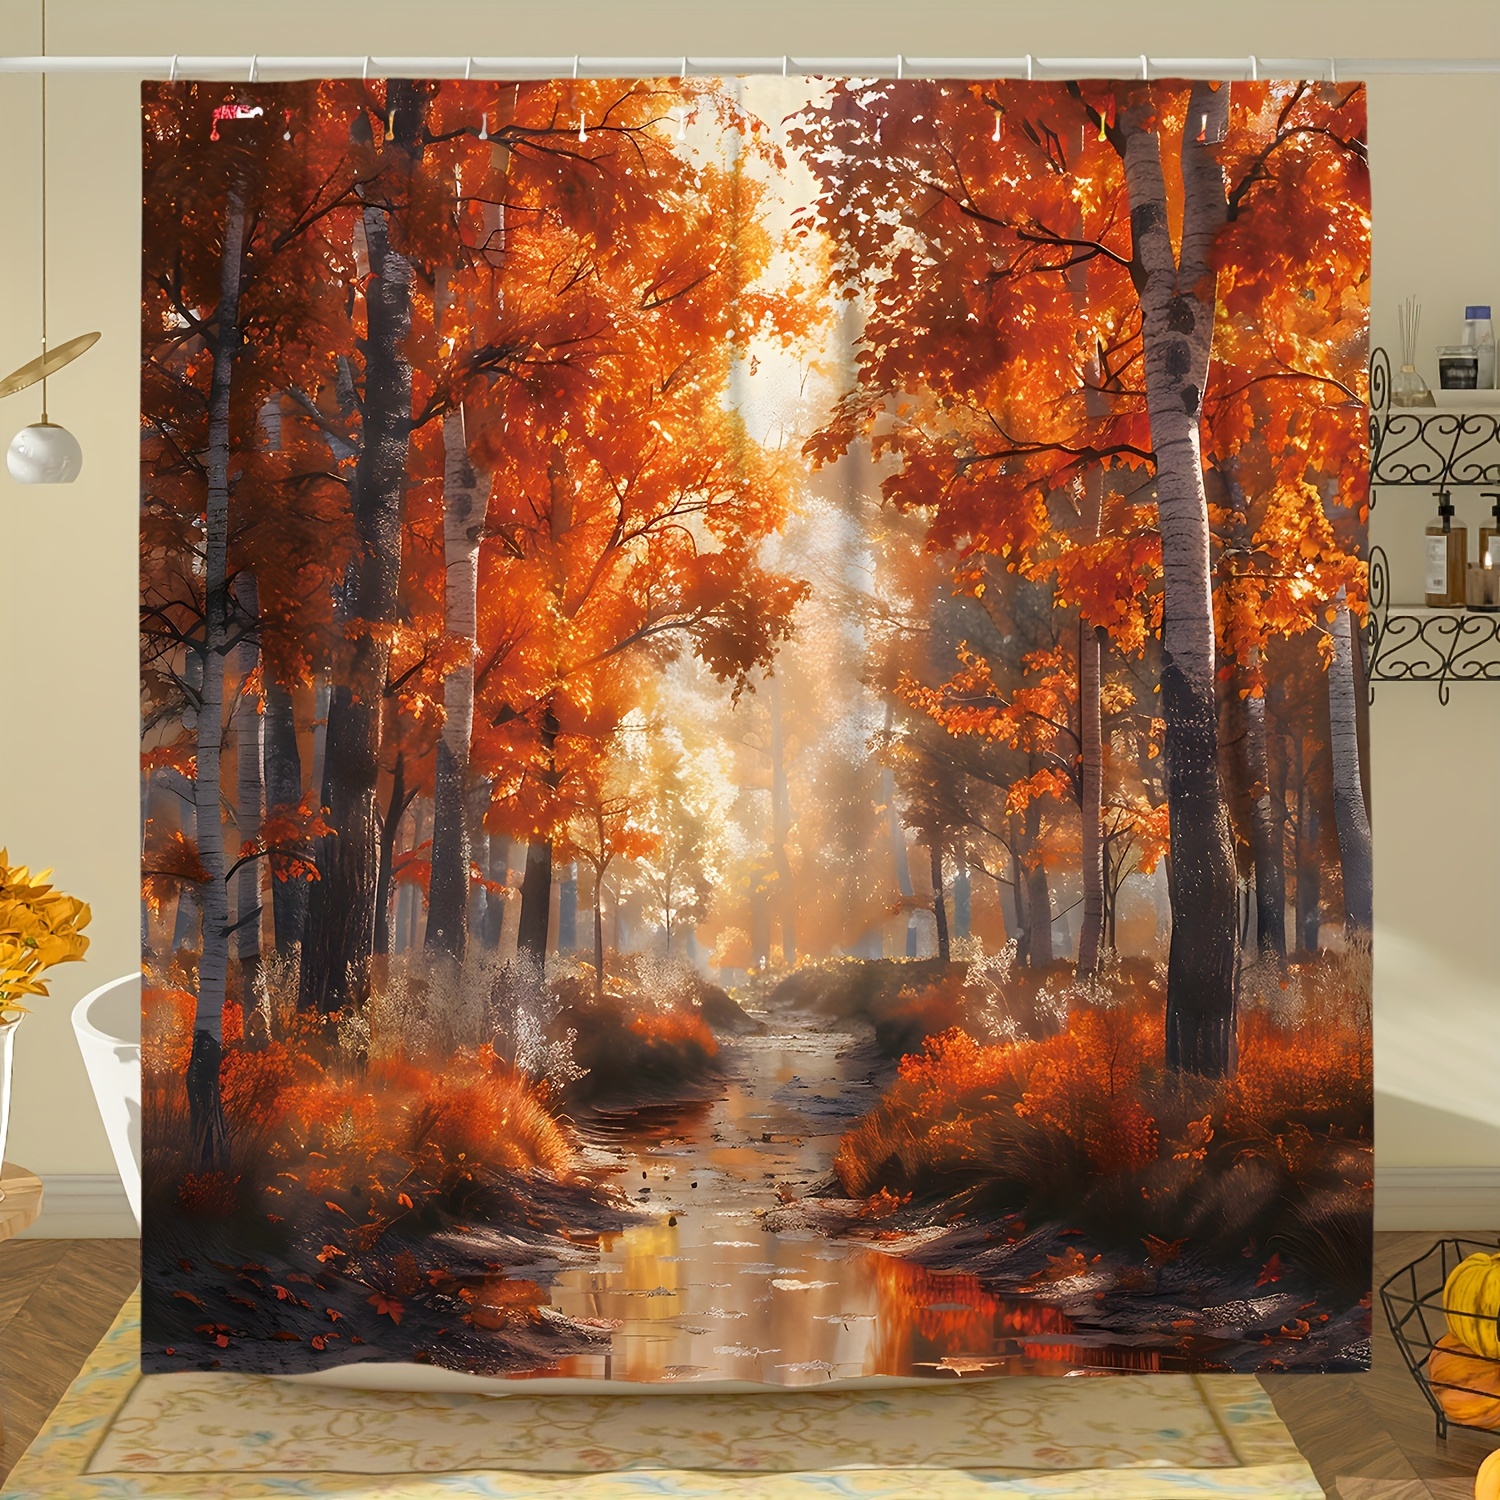 

Fall Forest Maple Leaf Shower Curtain - Natural Woodland Burnt Orange, Waterproof Polyester Fabric, Machine Washable, Autumn Bathroom Decor With 12 Hooks, 71x71 Inch - 1pc